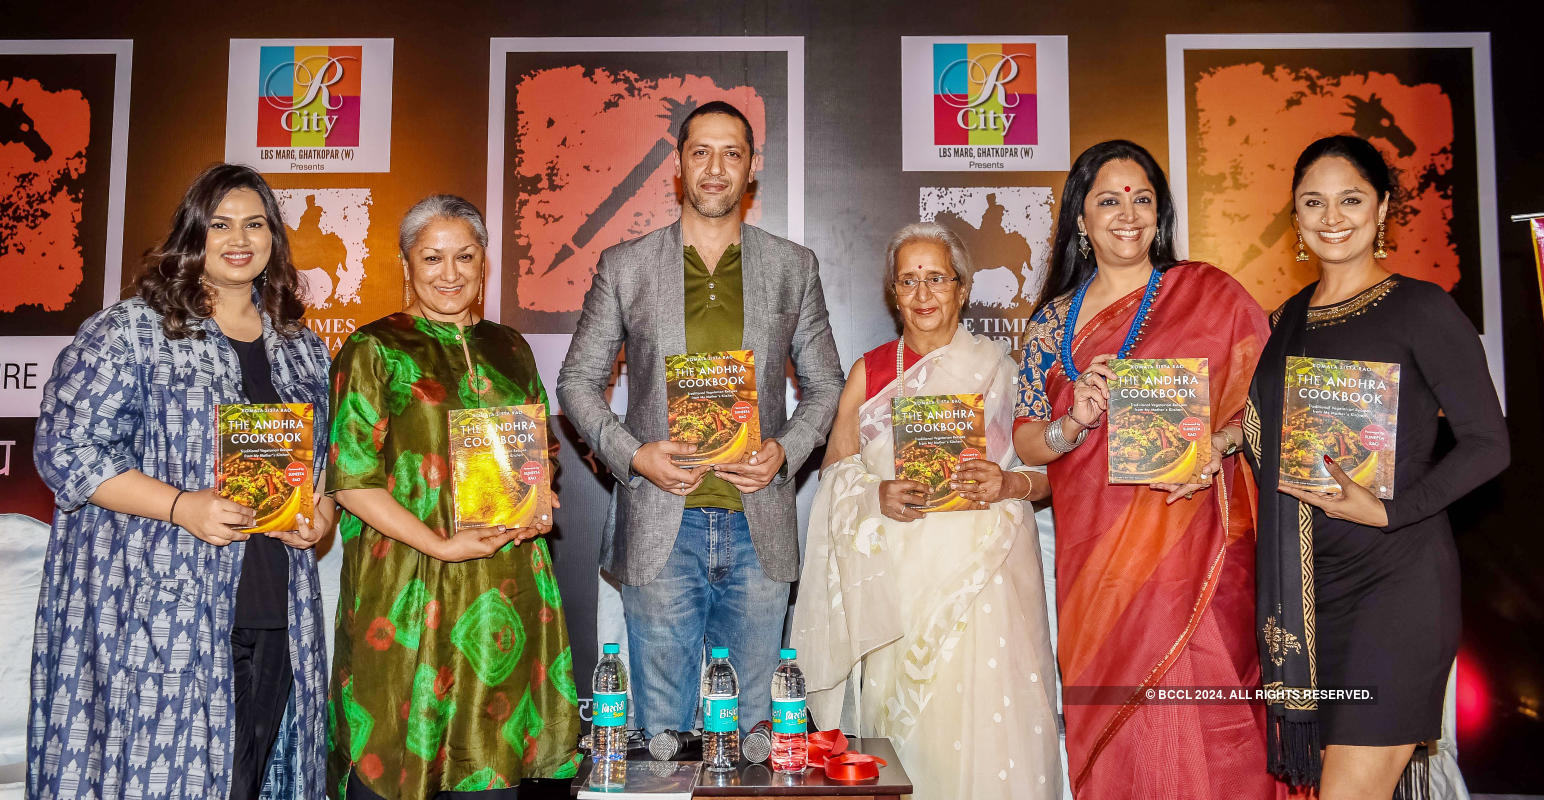 The Andhra Cookbook: Book launch